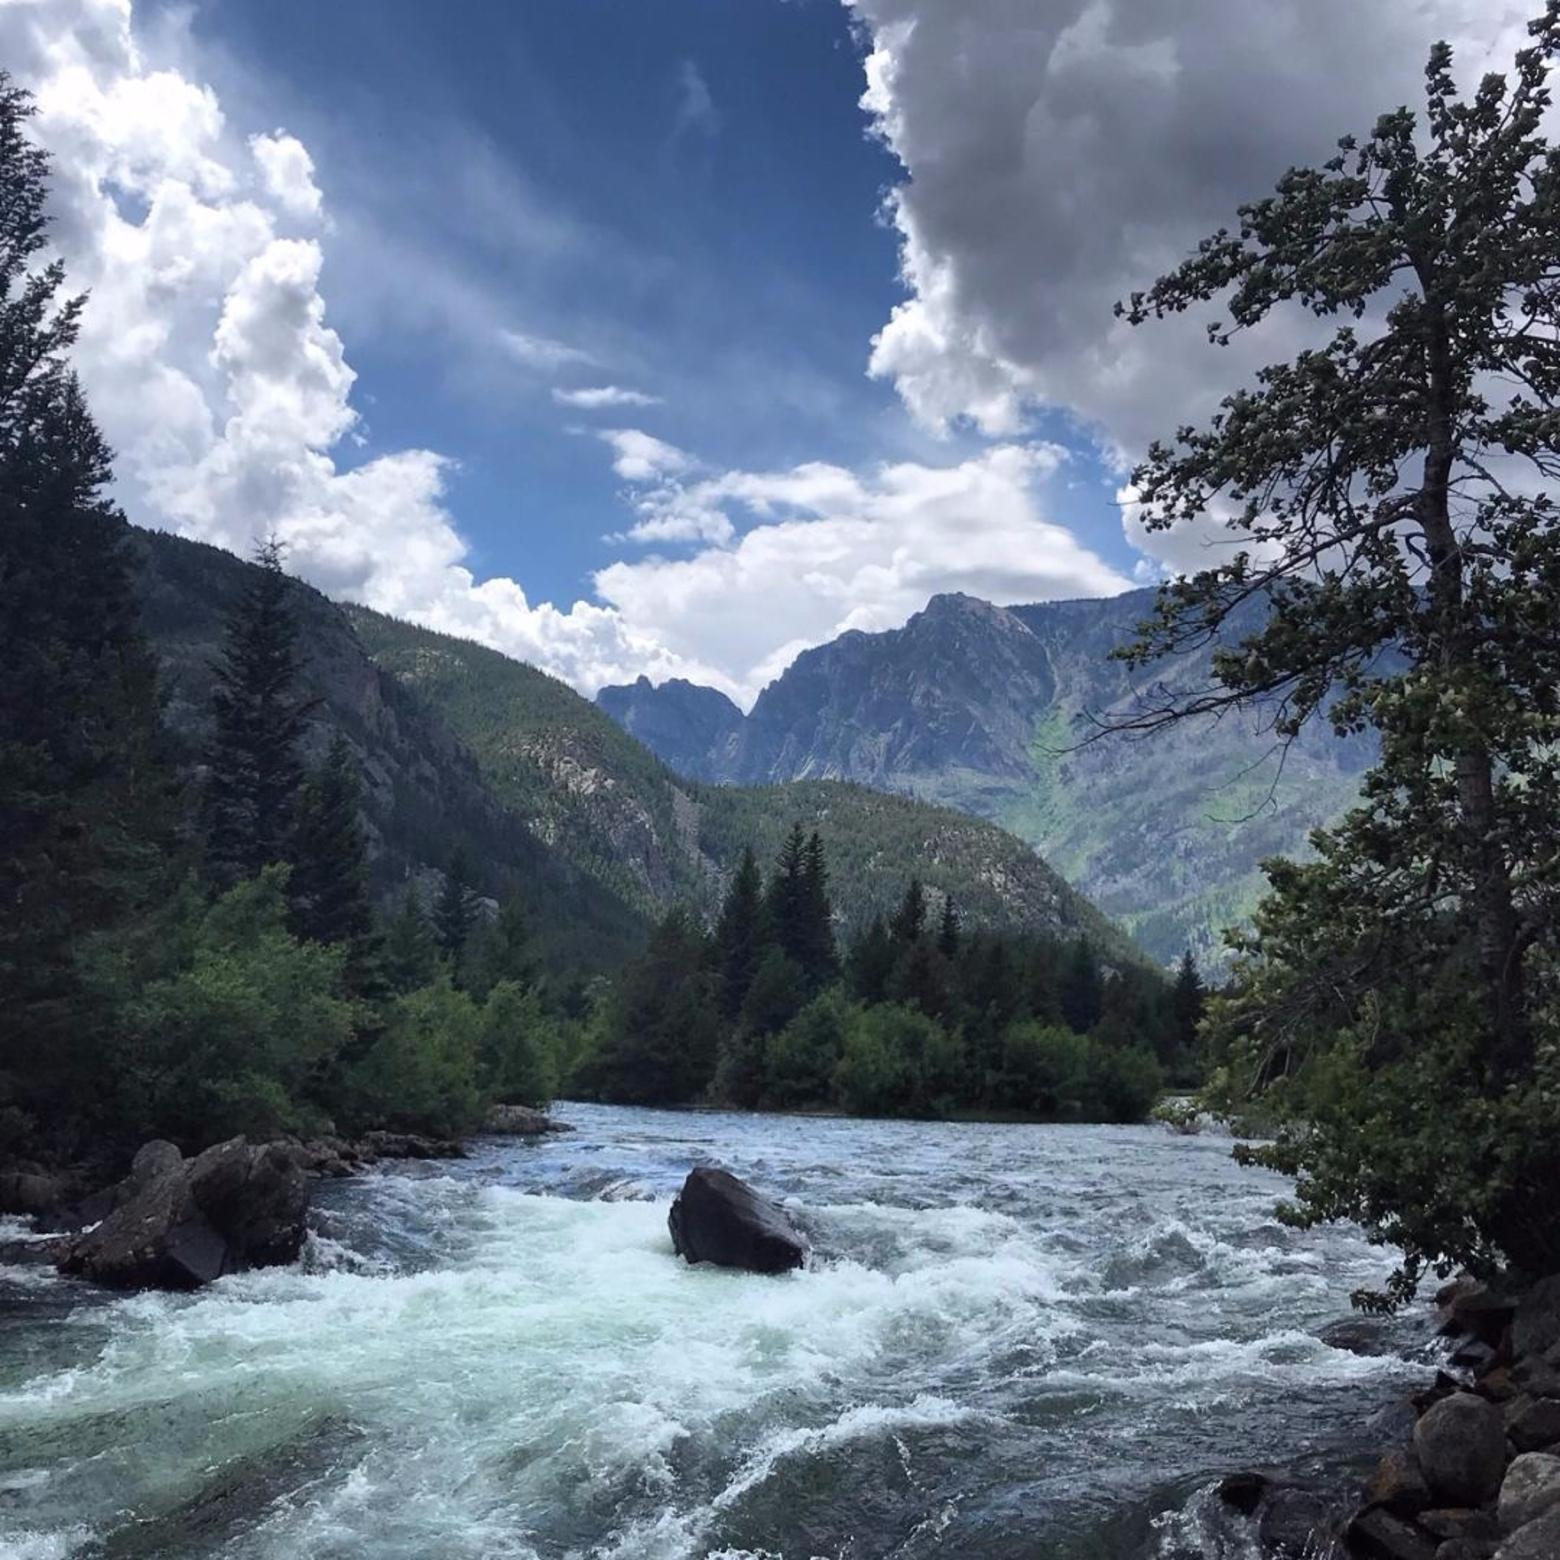 The Stillwater River and the chasm of the canyon forged by rushing water. When we stop to listen, what do we hear?  Photo courtesy Timothy Tate